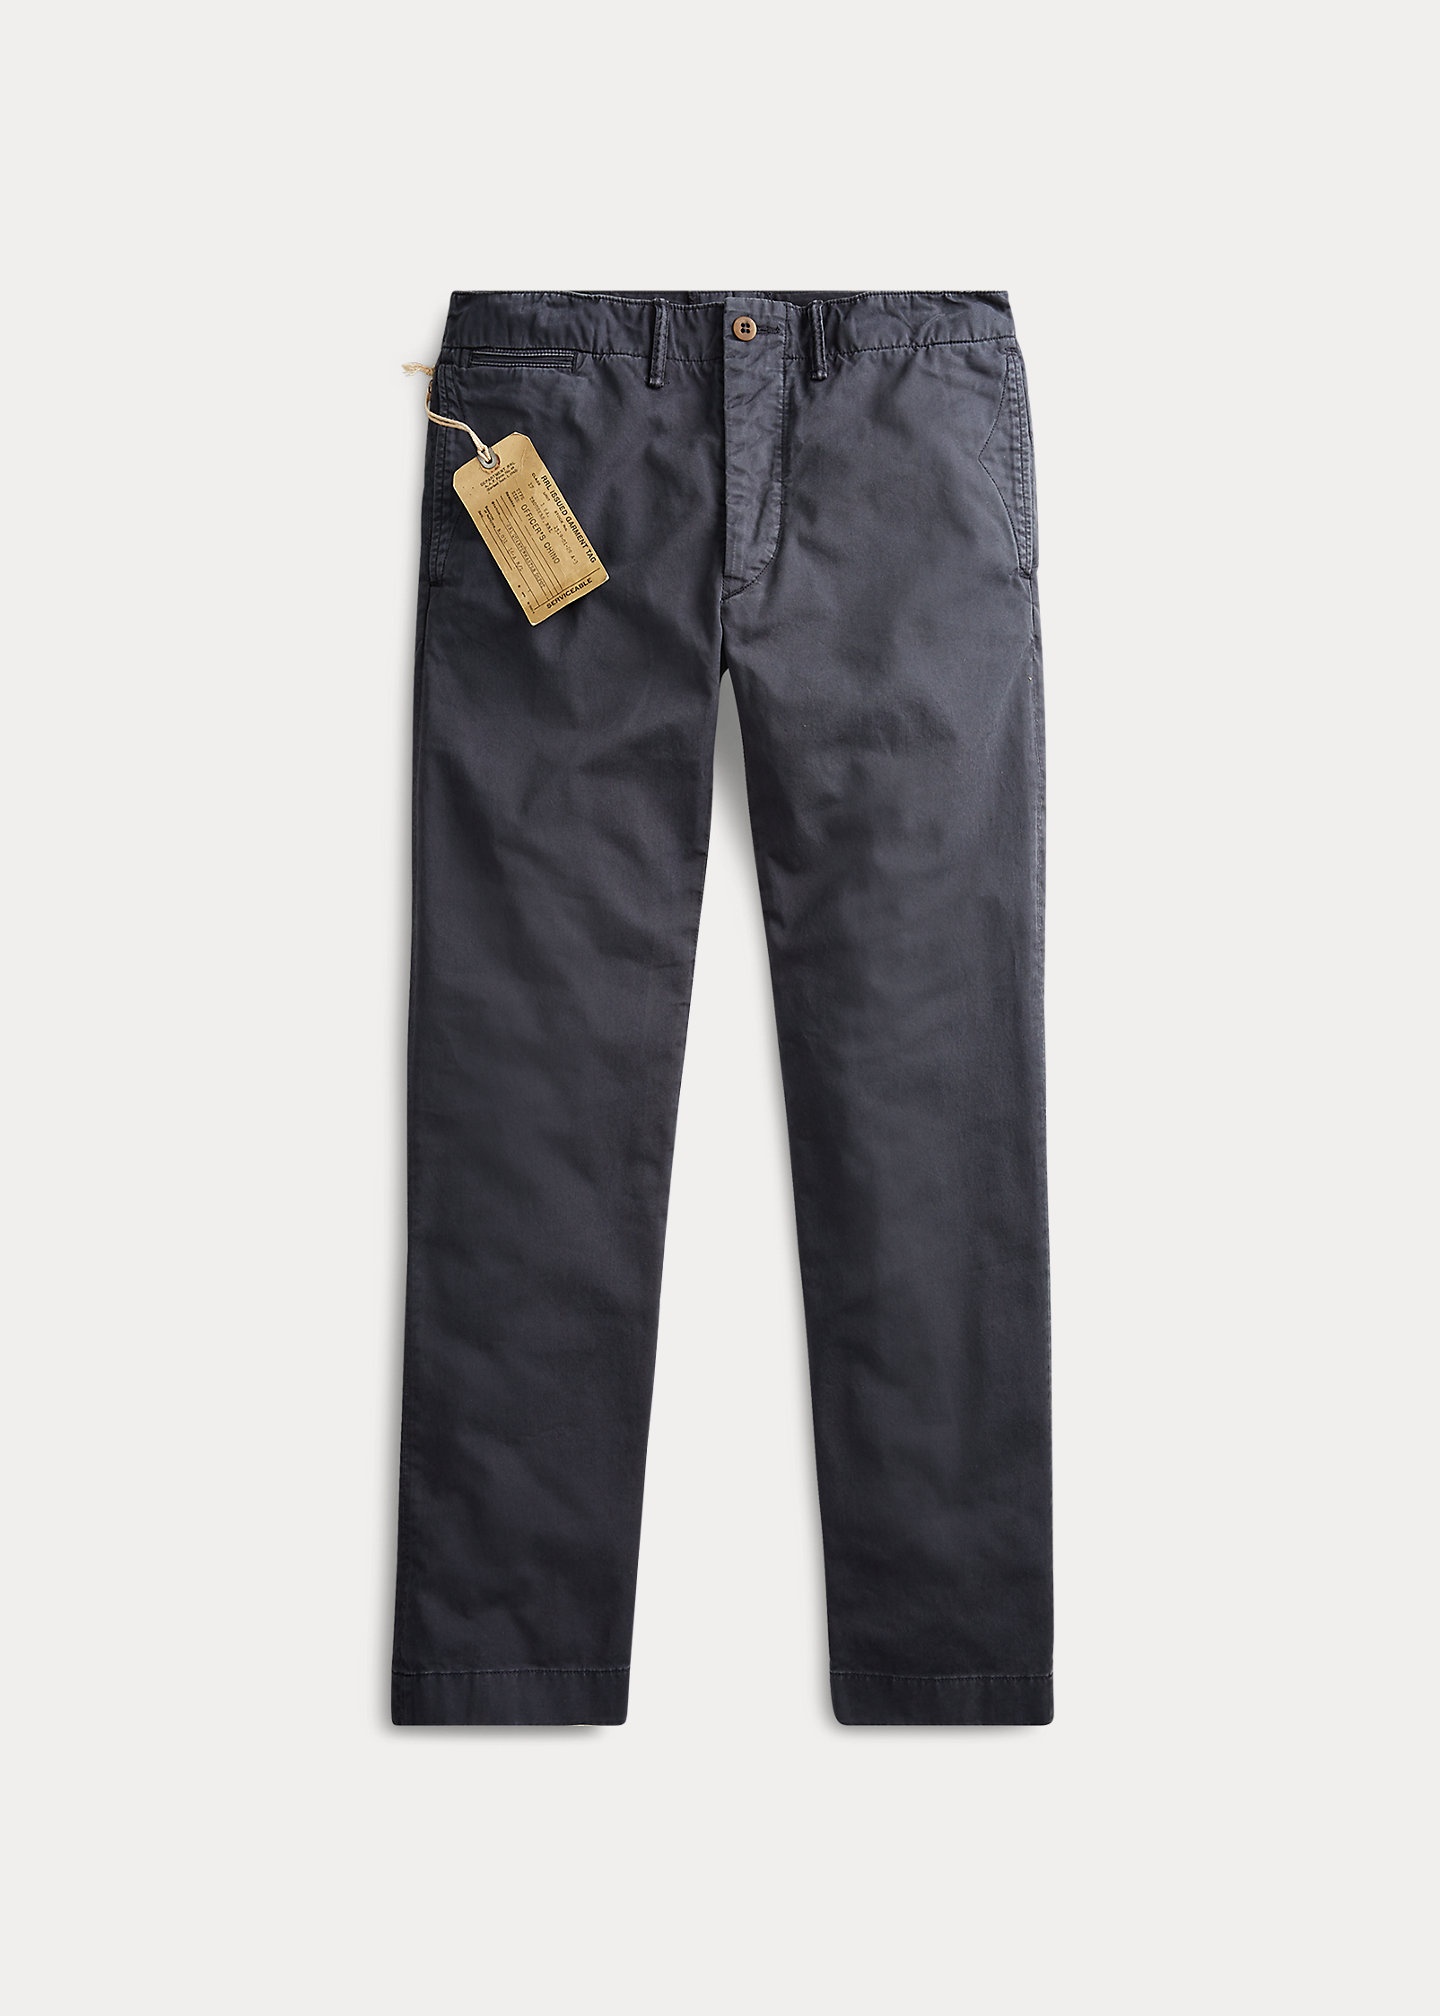 Officer’s Chino Pant - 1